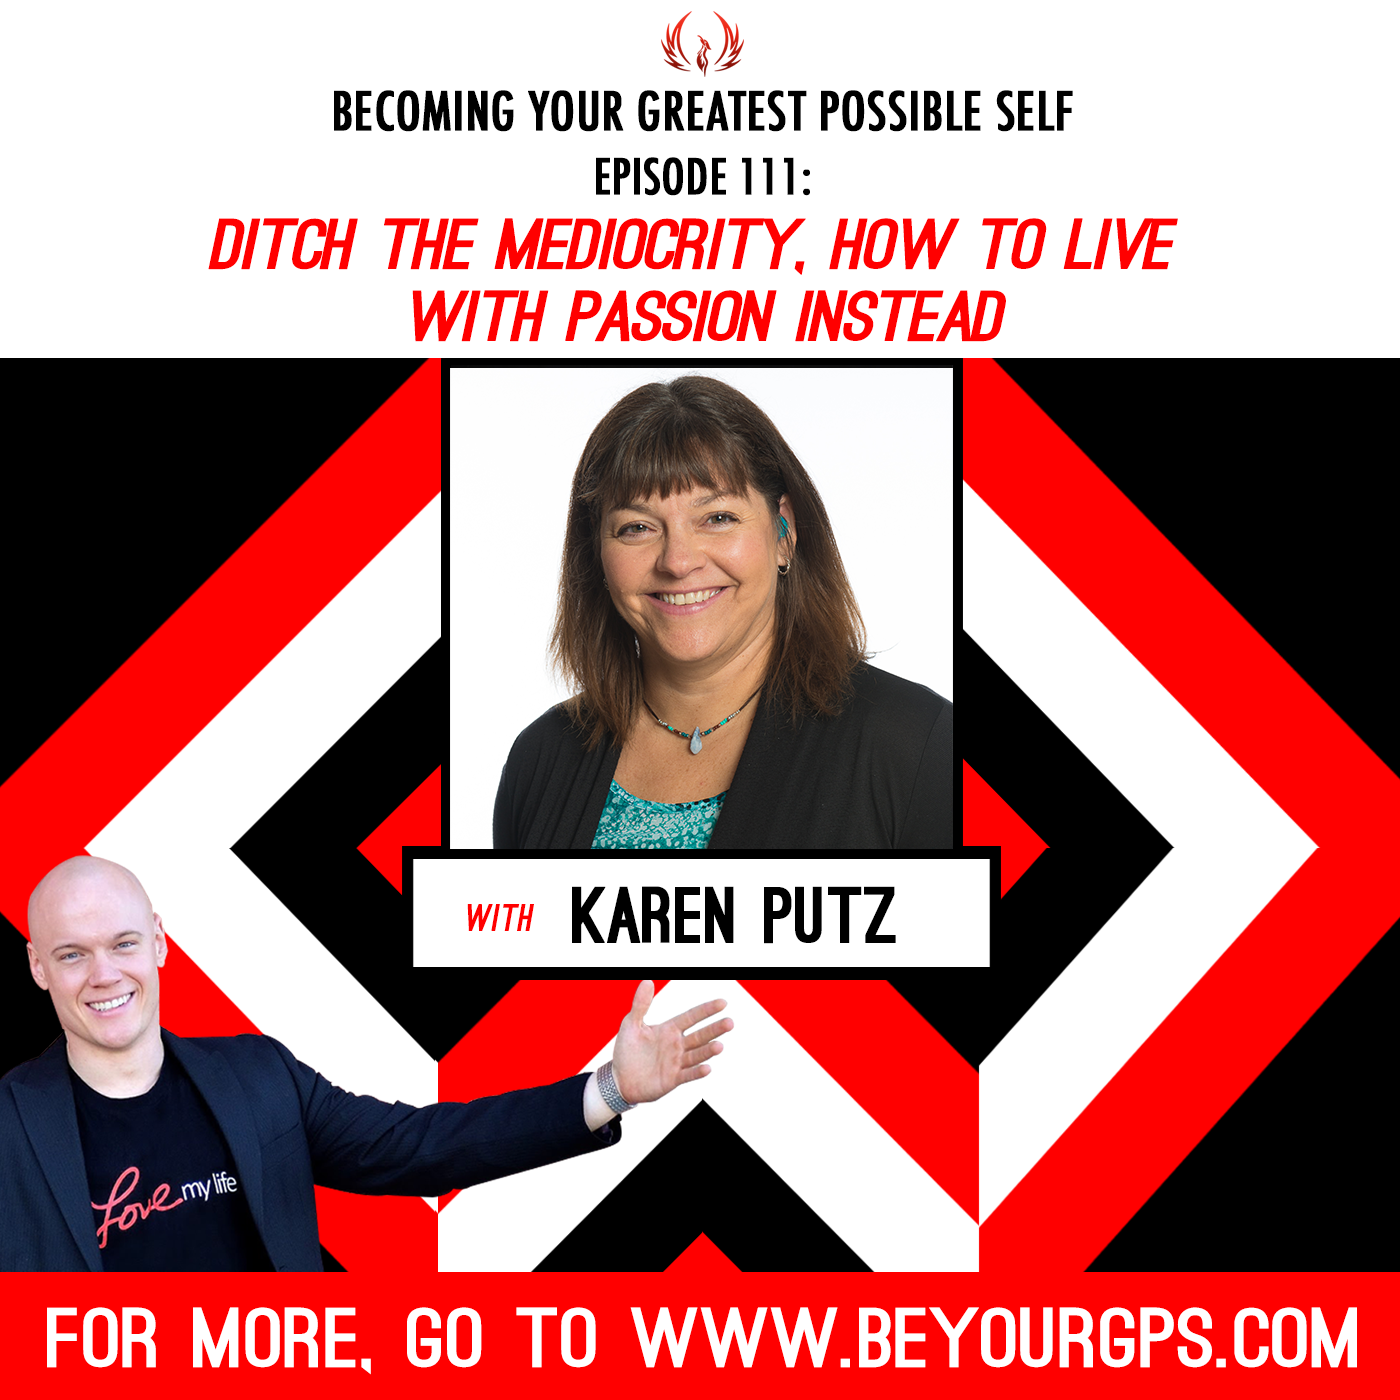 Ditch The Mediocrity, How To Live With Passion Instead with Karen Putz